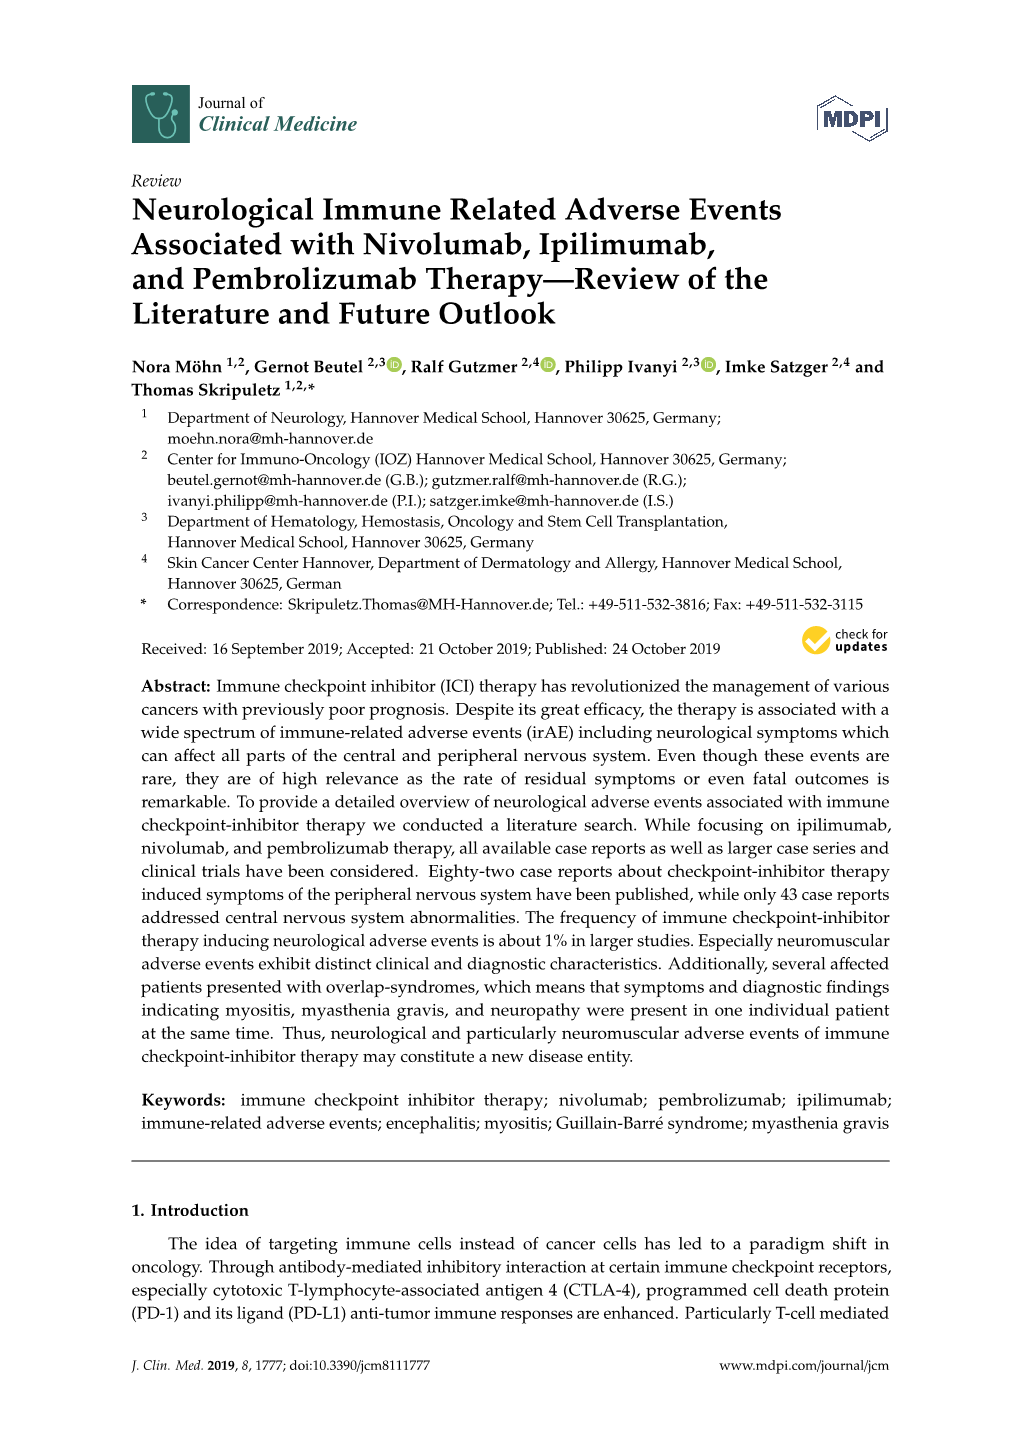 Neurological Immune Related Adverse Events Associated with Nivolumab, Ipilimumab, and Pembrolizumab Therapy—Review of the Literature and Future Outlook